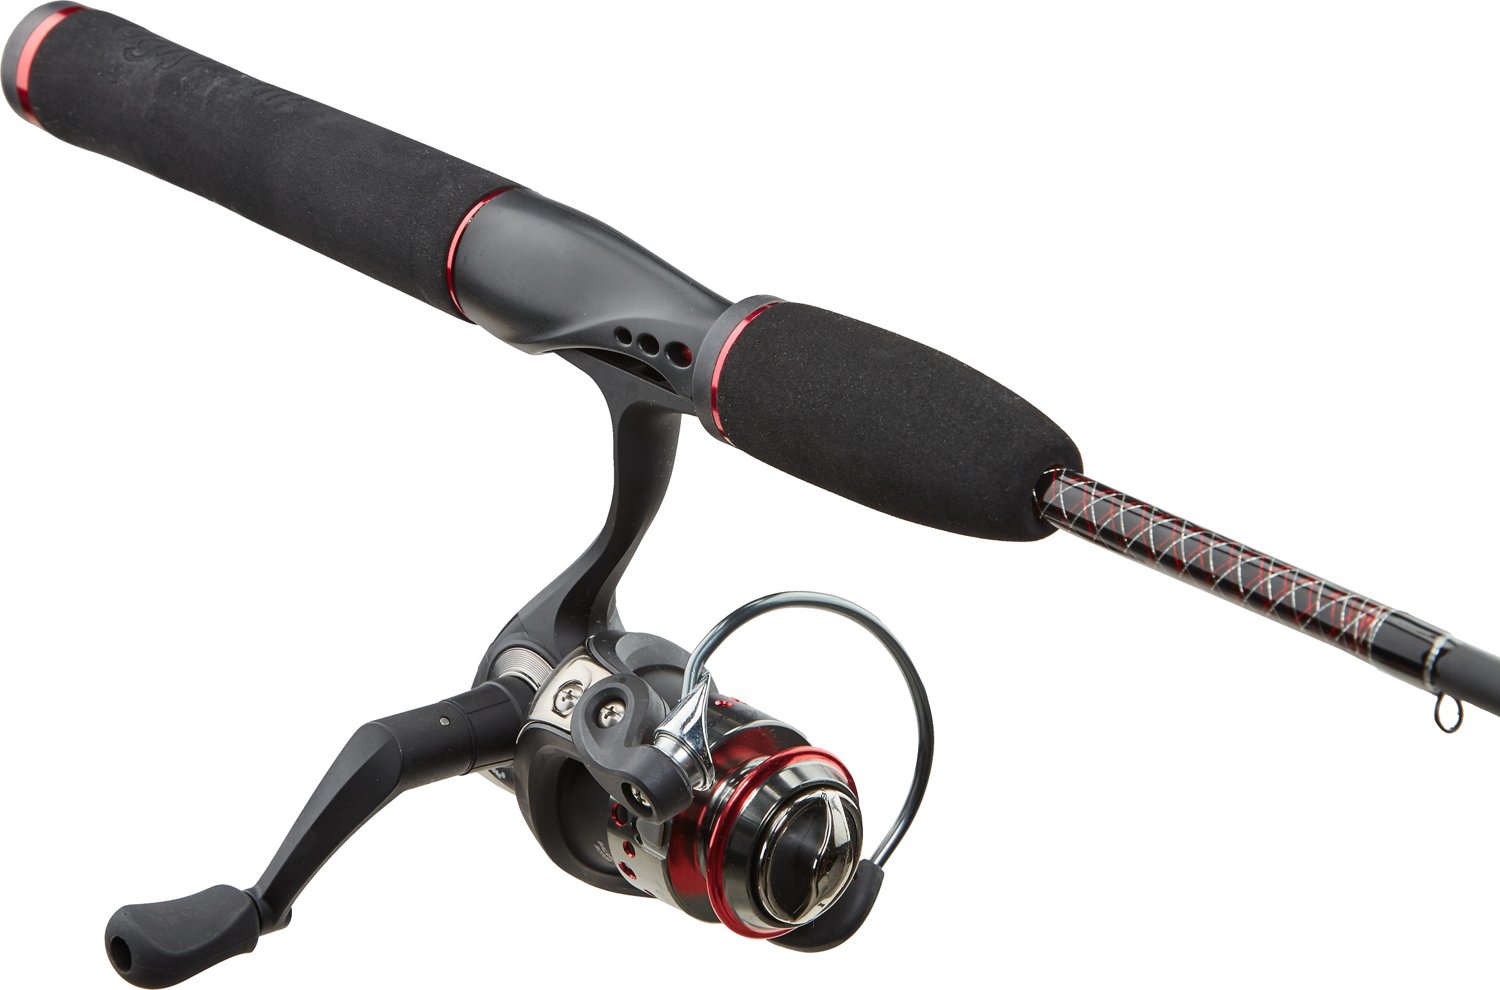 Ugly Stik GX2 4'8 UL Freshwater/Saltwater Spinning Rod and Reel Combo